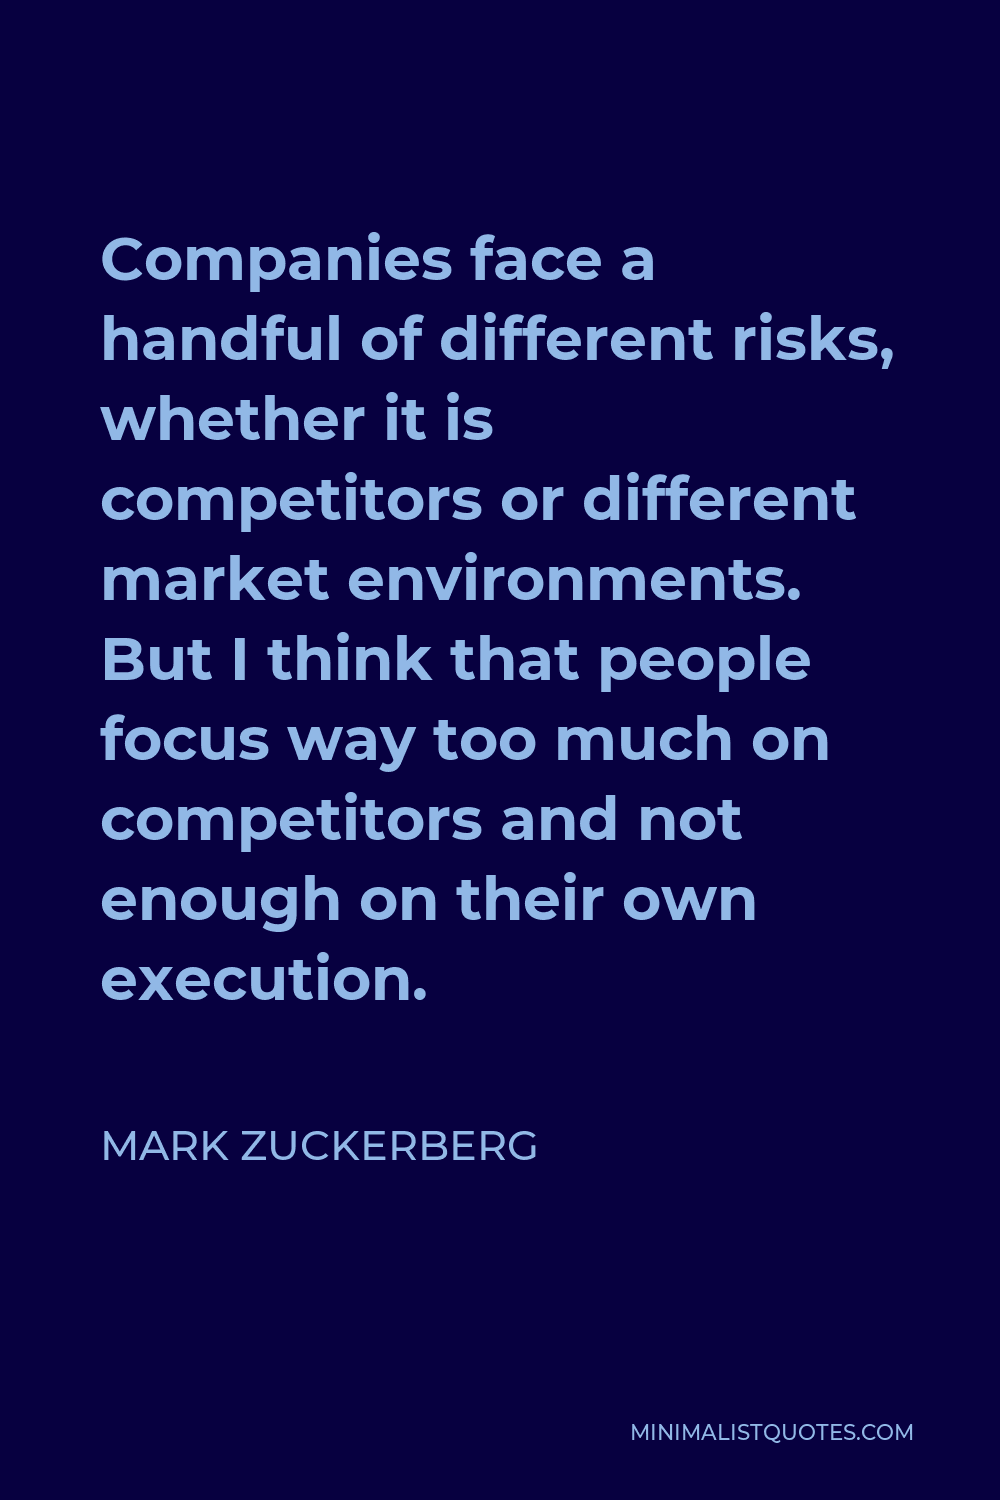 Mark Zuckerberg Quote - Companies face a handful of different risks, whether it is competitors or different market environments. But I think that people focus way too much on competitors and not enough on their own execution.